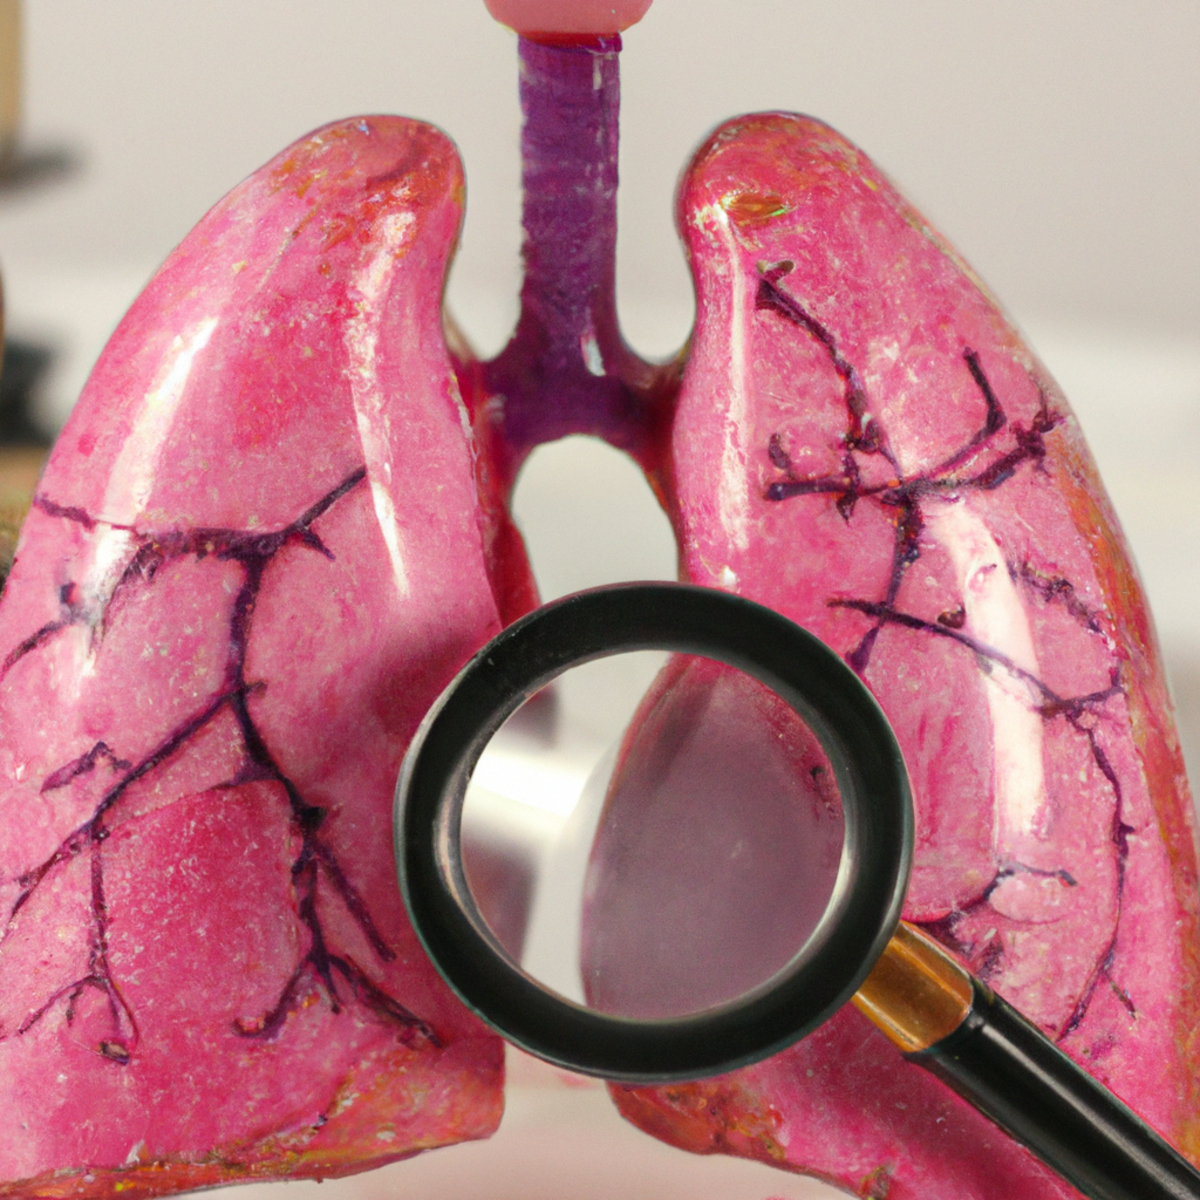 Detailed lung model showing healthy and diseased parts with Pleuropulmonary Blastoma.